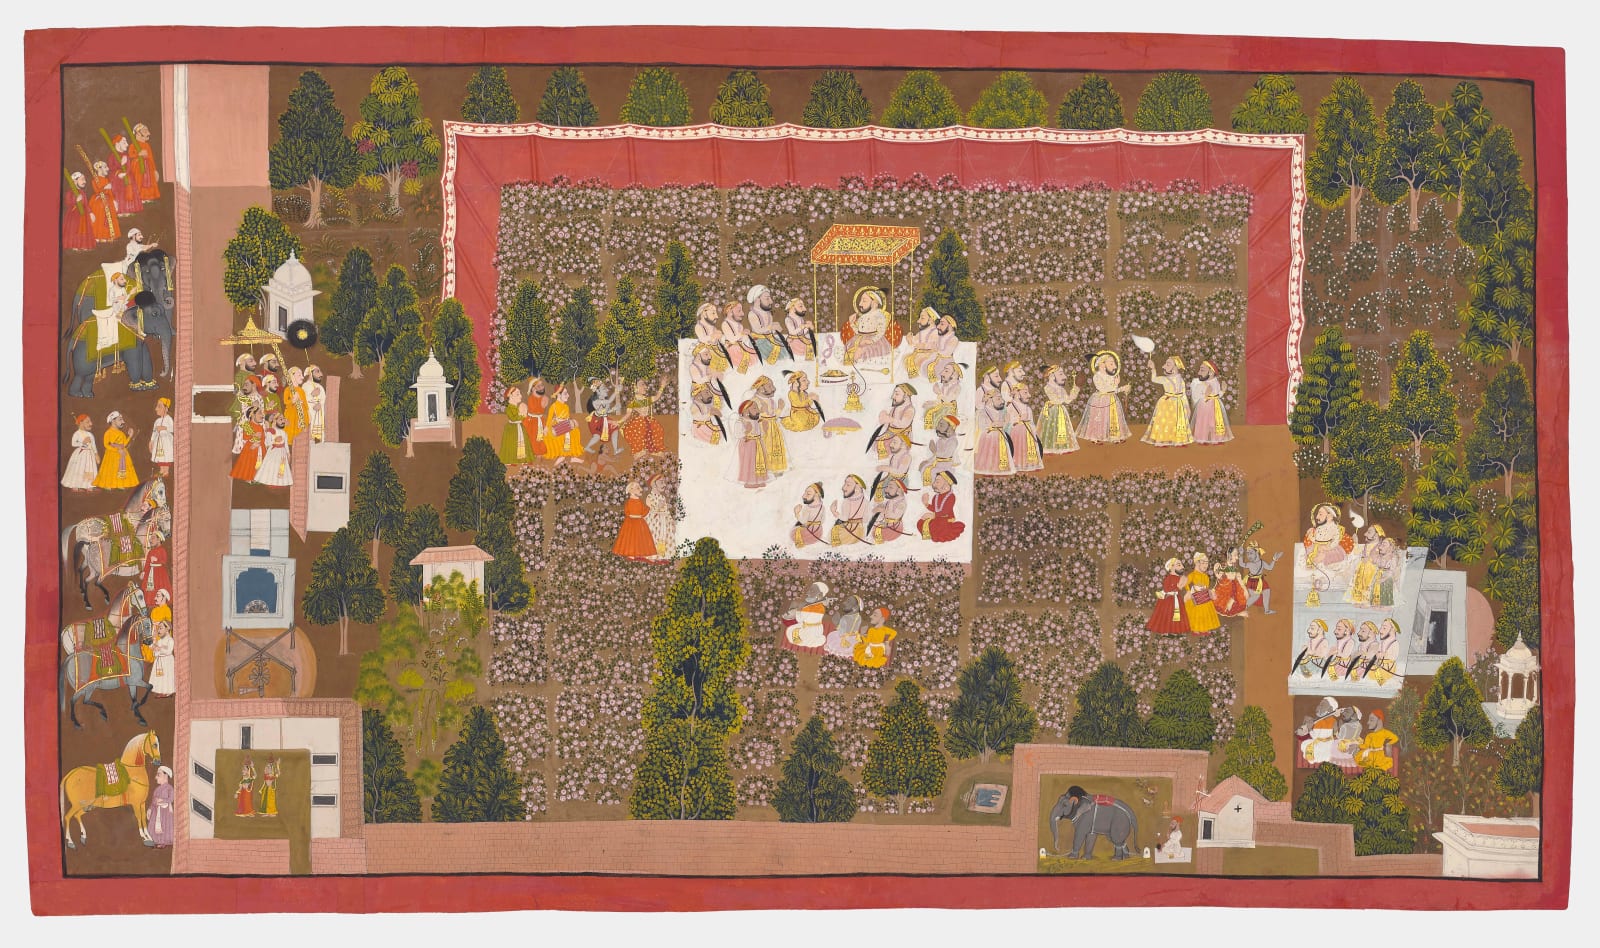 Maharana Sangram Singh celebrating the spring festival with his nobles in the rose garden in Udaipur, Udaipur, 1715–20